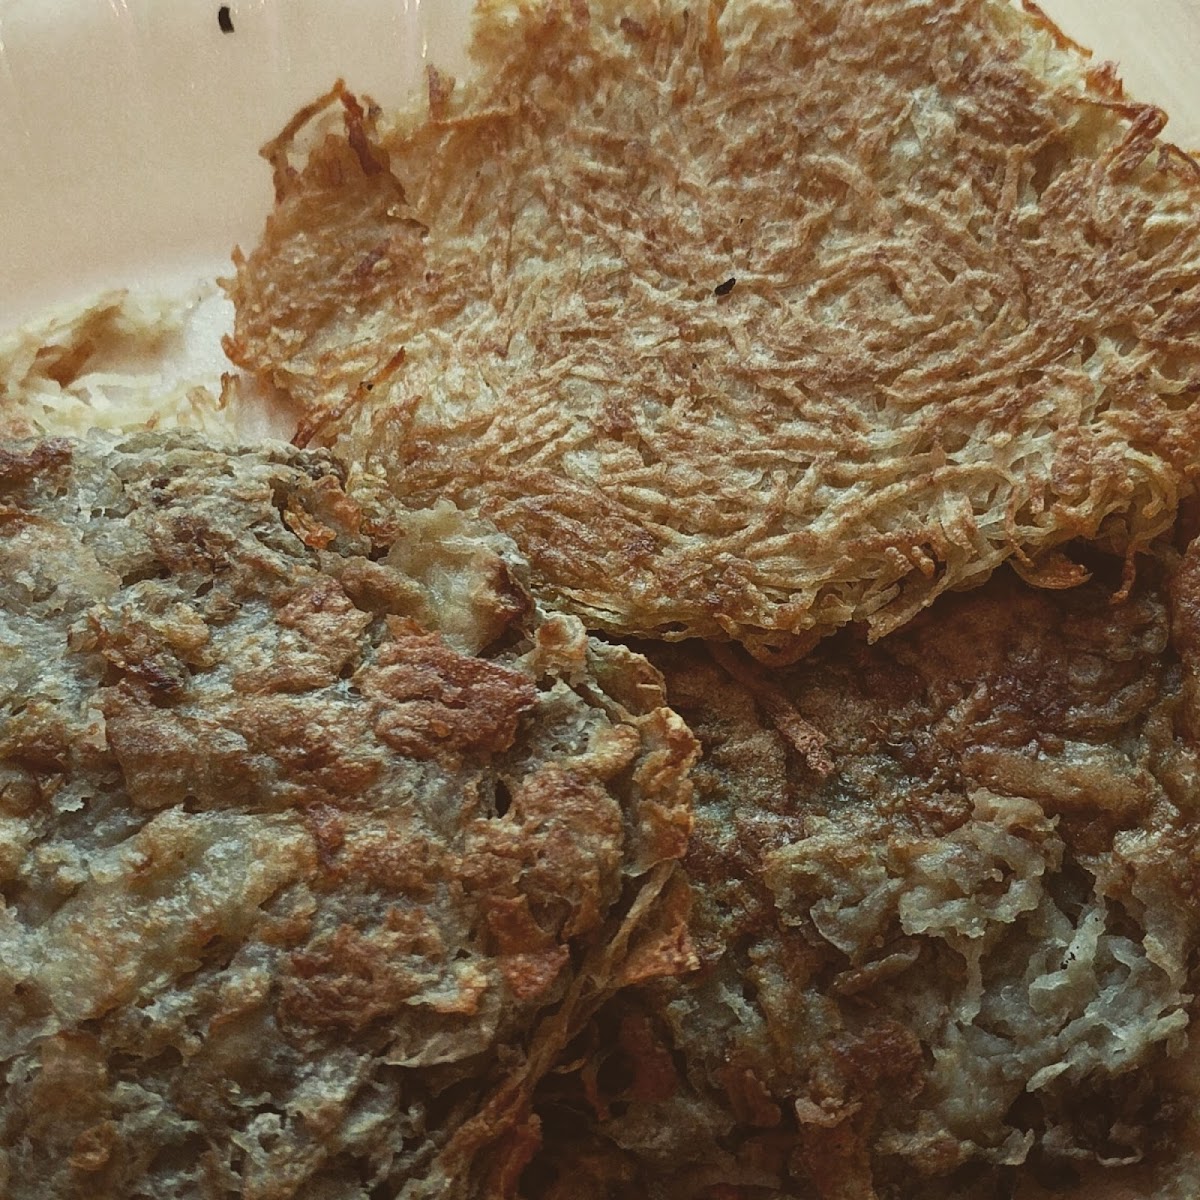 my first gluten free potato latkes in 20+ years! delicious! came with sour cream and added Apple sauce! mmmm